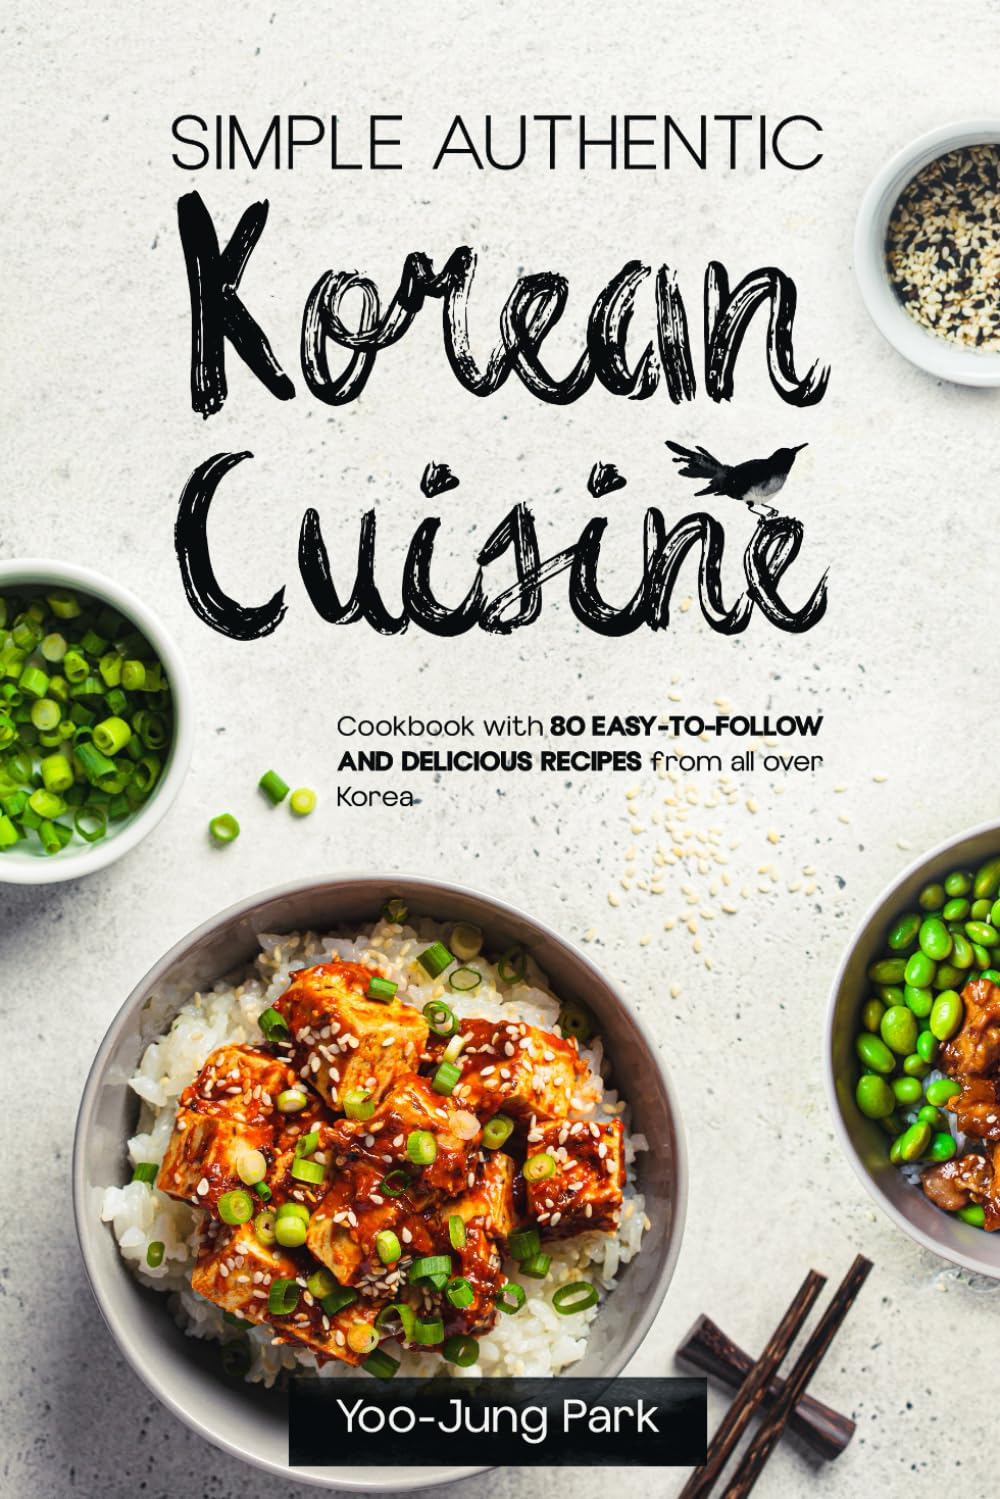 Simple Authentic Korean Cuisine: Cookbook with 80 Easy-to-Follow and Delicious Recipes from all over Korea